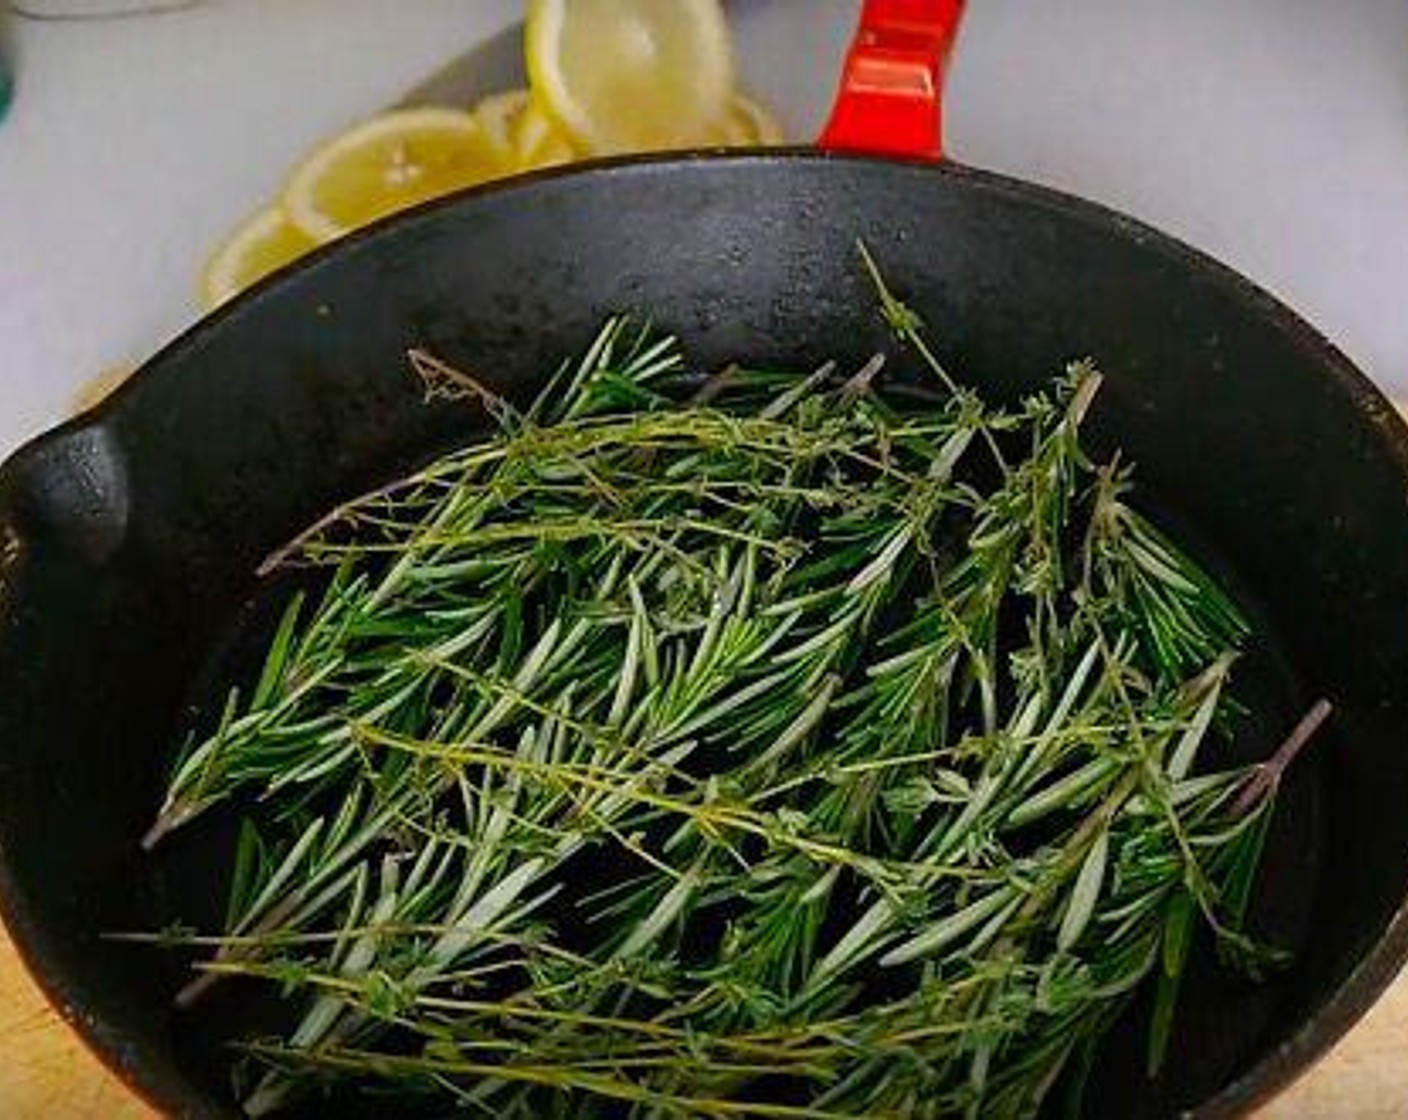 step 4 In an oven-safe skillet or baking tray make a bed of Fresh Rosemary (1/2 cup) and Fresh Thyme (1/3 cup).